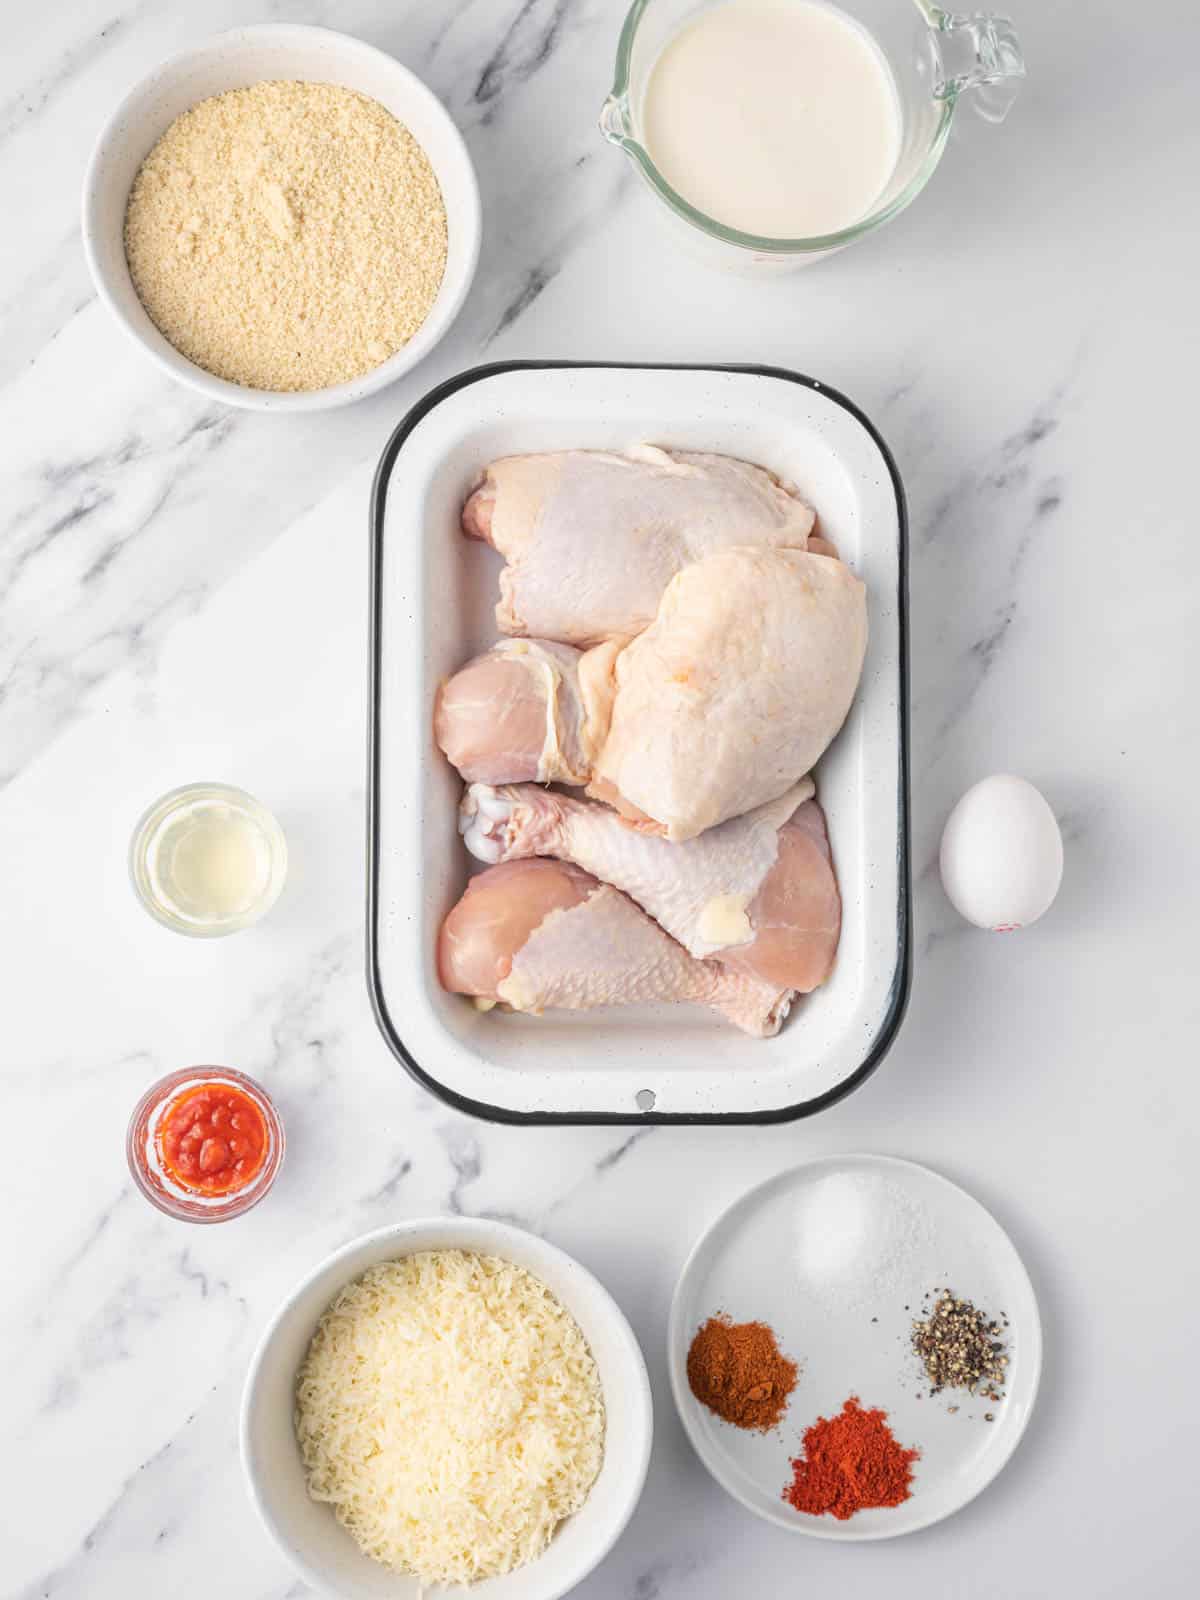 Ingredients needed for fried chicken keto.